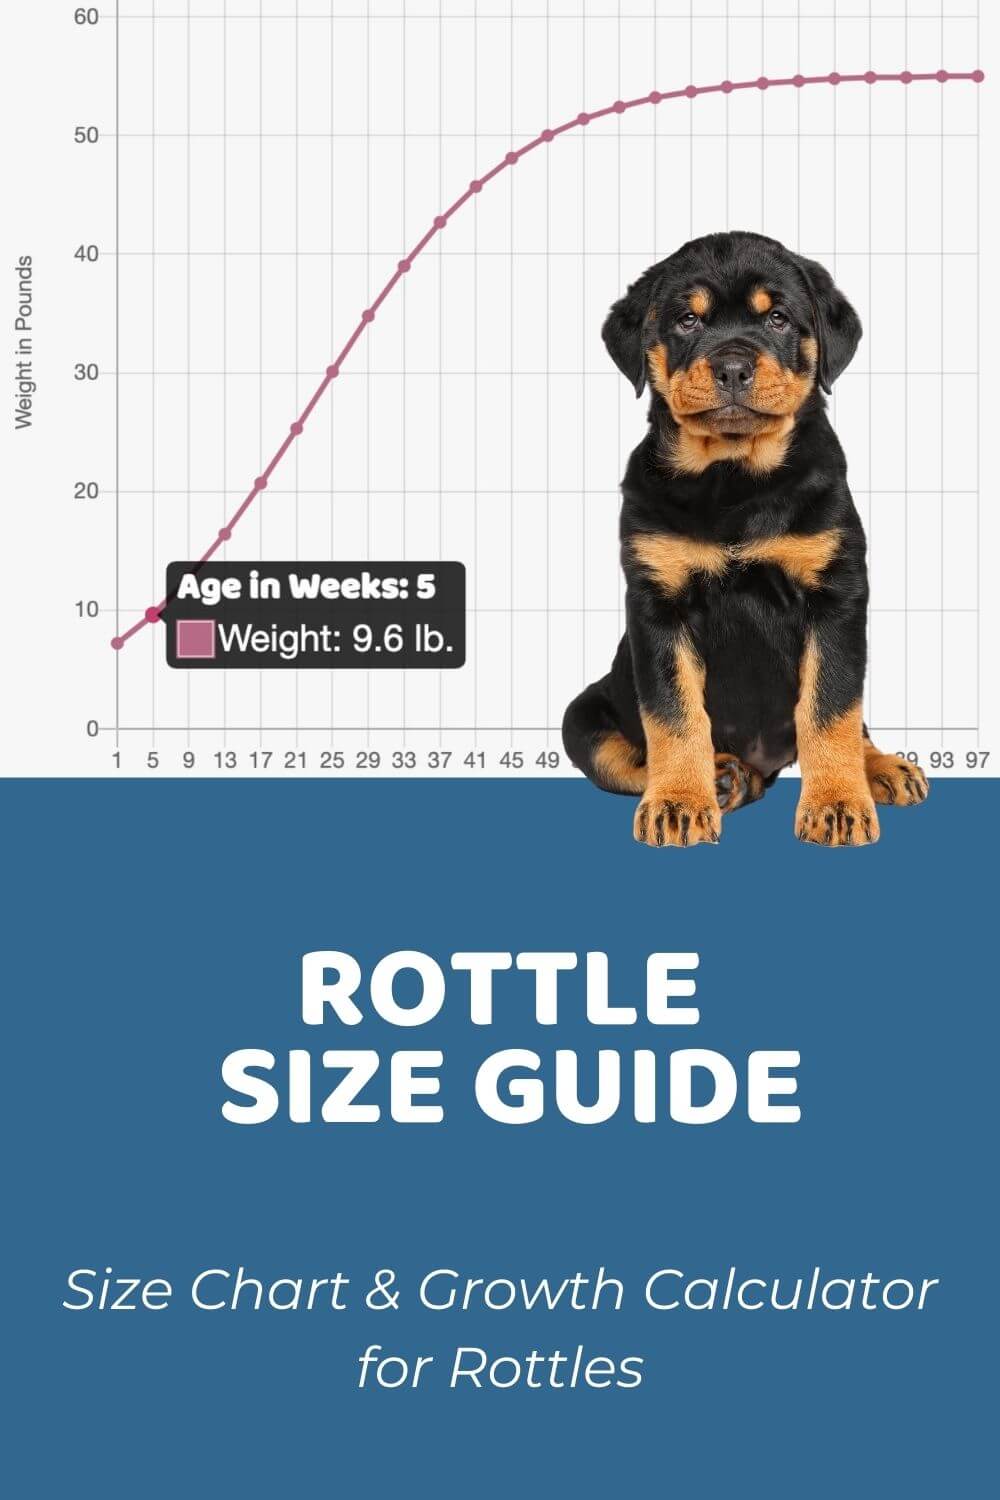 Rottle Size Chart, Growth Patterns & Growth Calculator